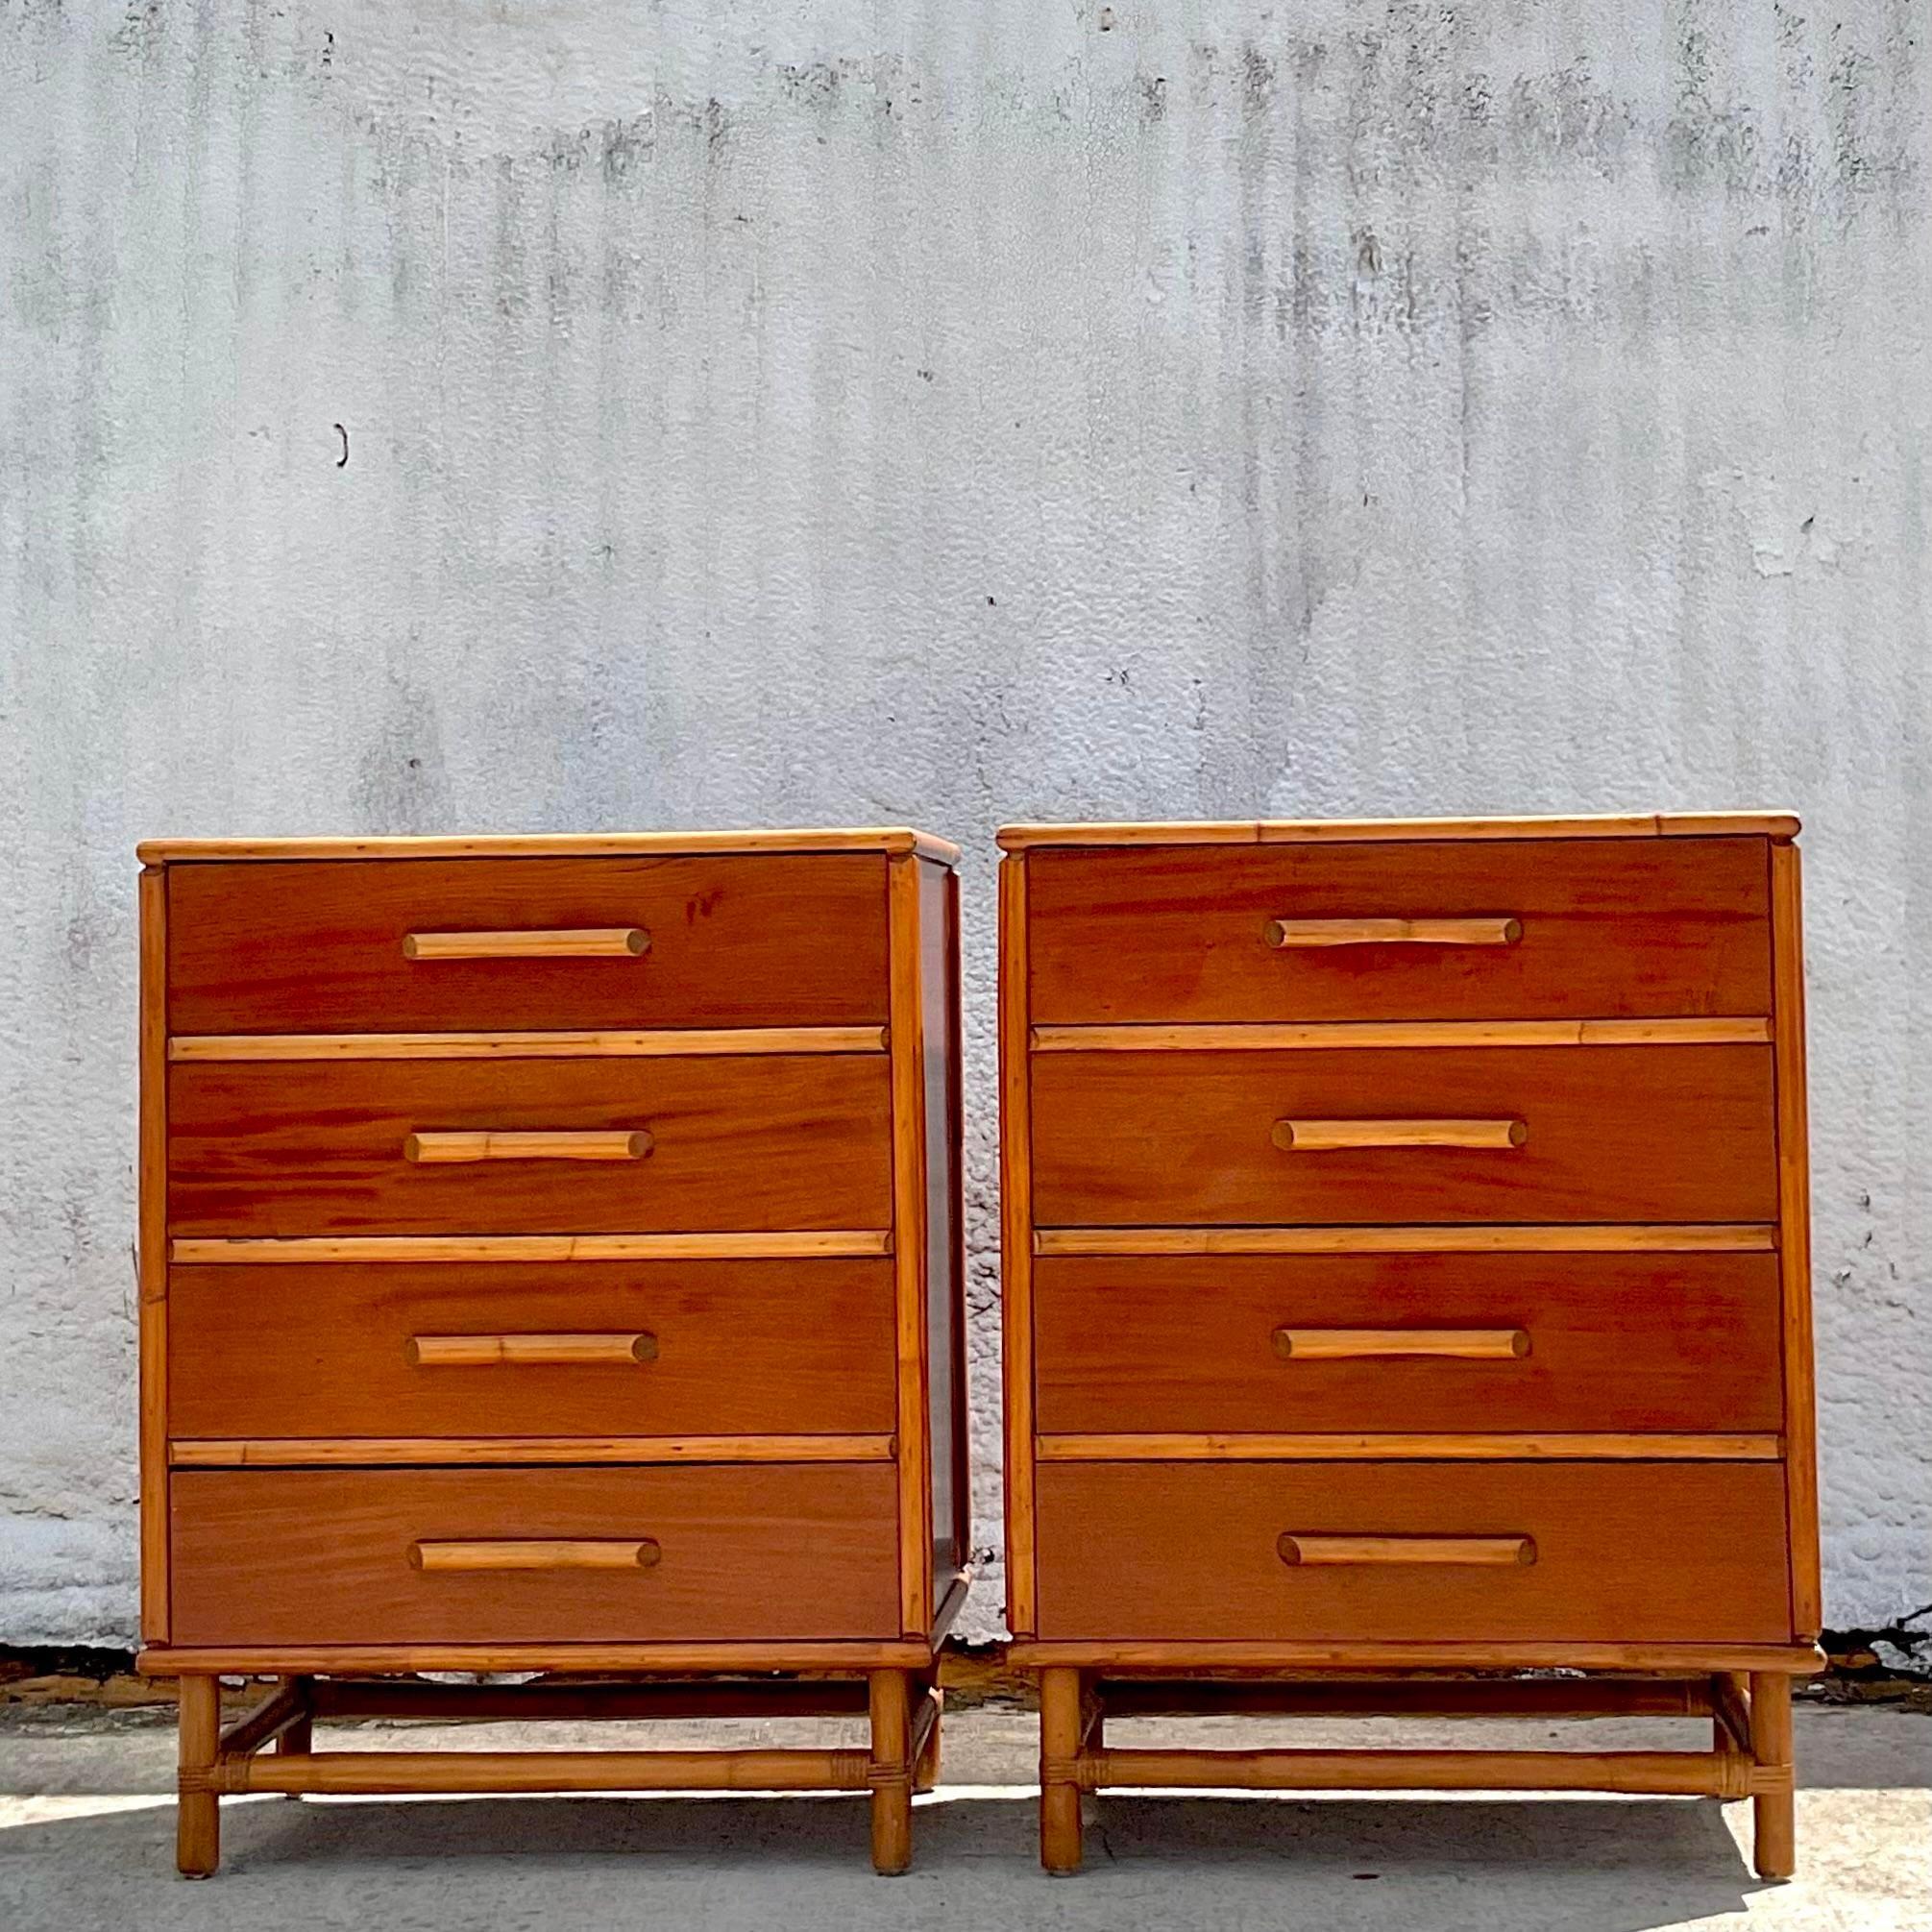 Vintage Coastal Trellis Rattan Mahogany Tall Chests - a Pair In Good Condition For Sale In west palm beach, FL